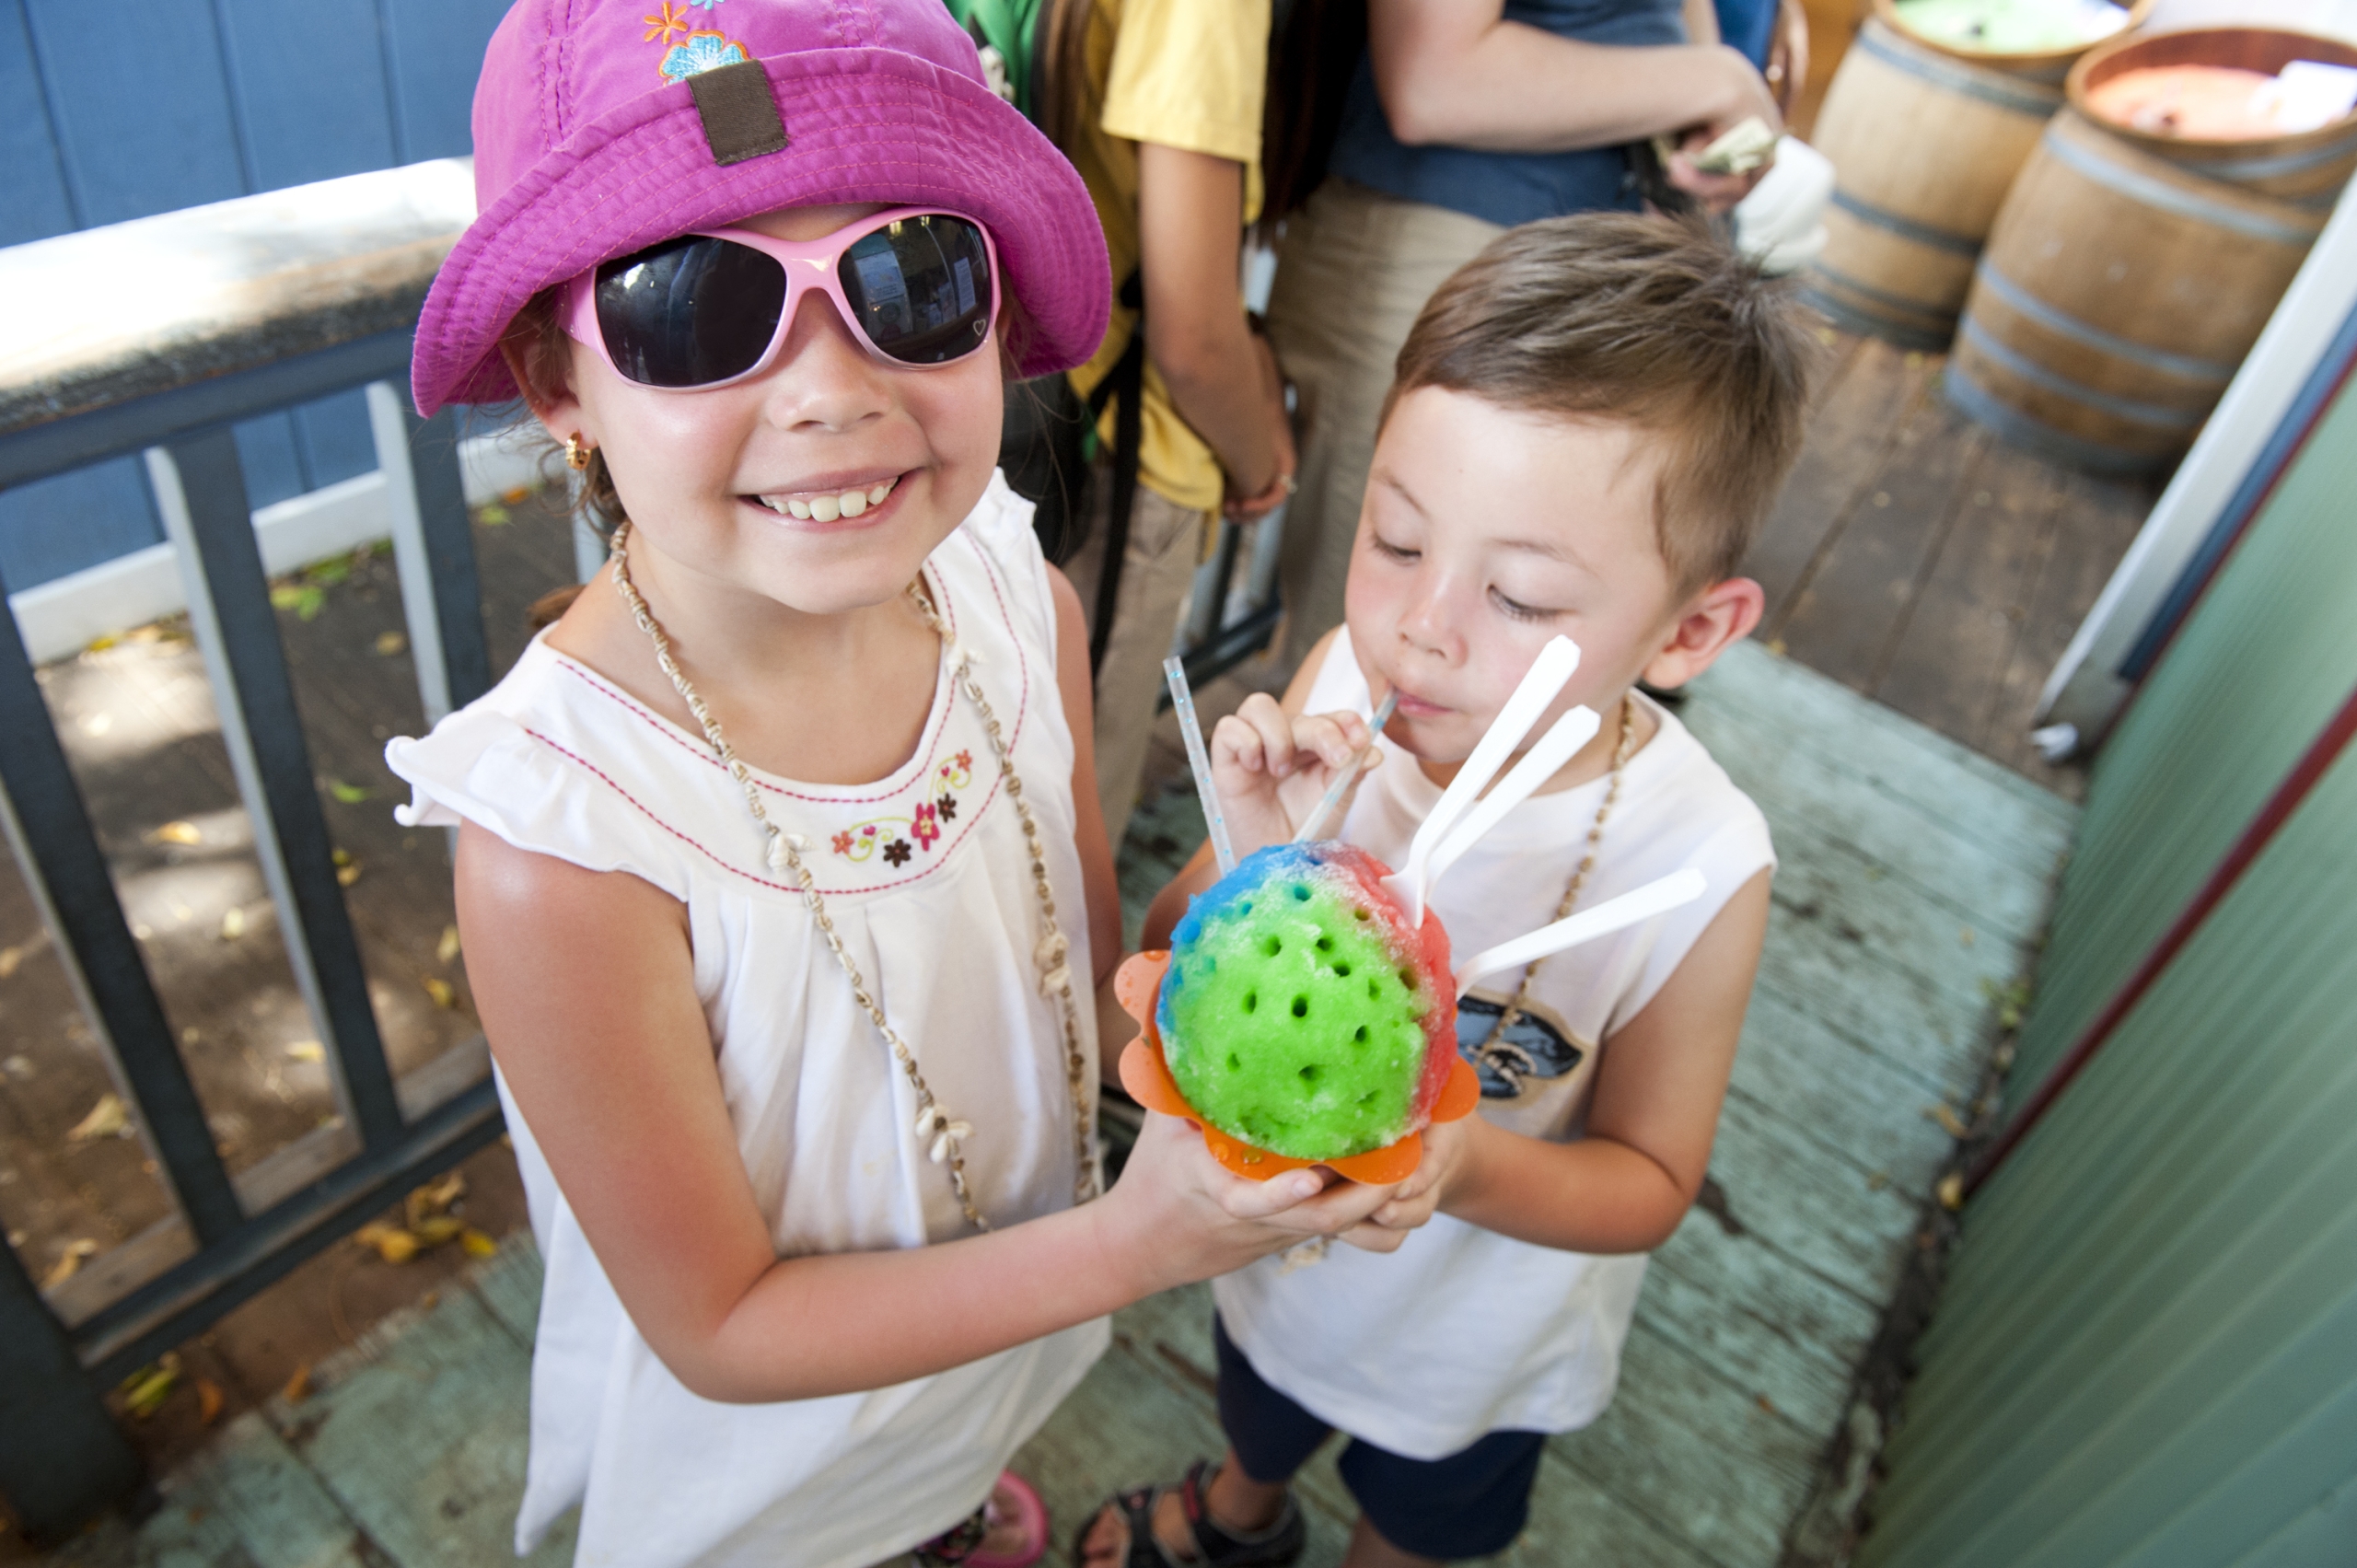 Two children share an order of shave ice